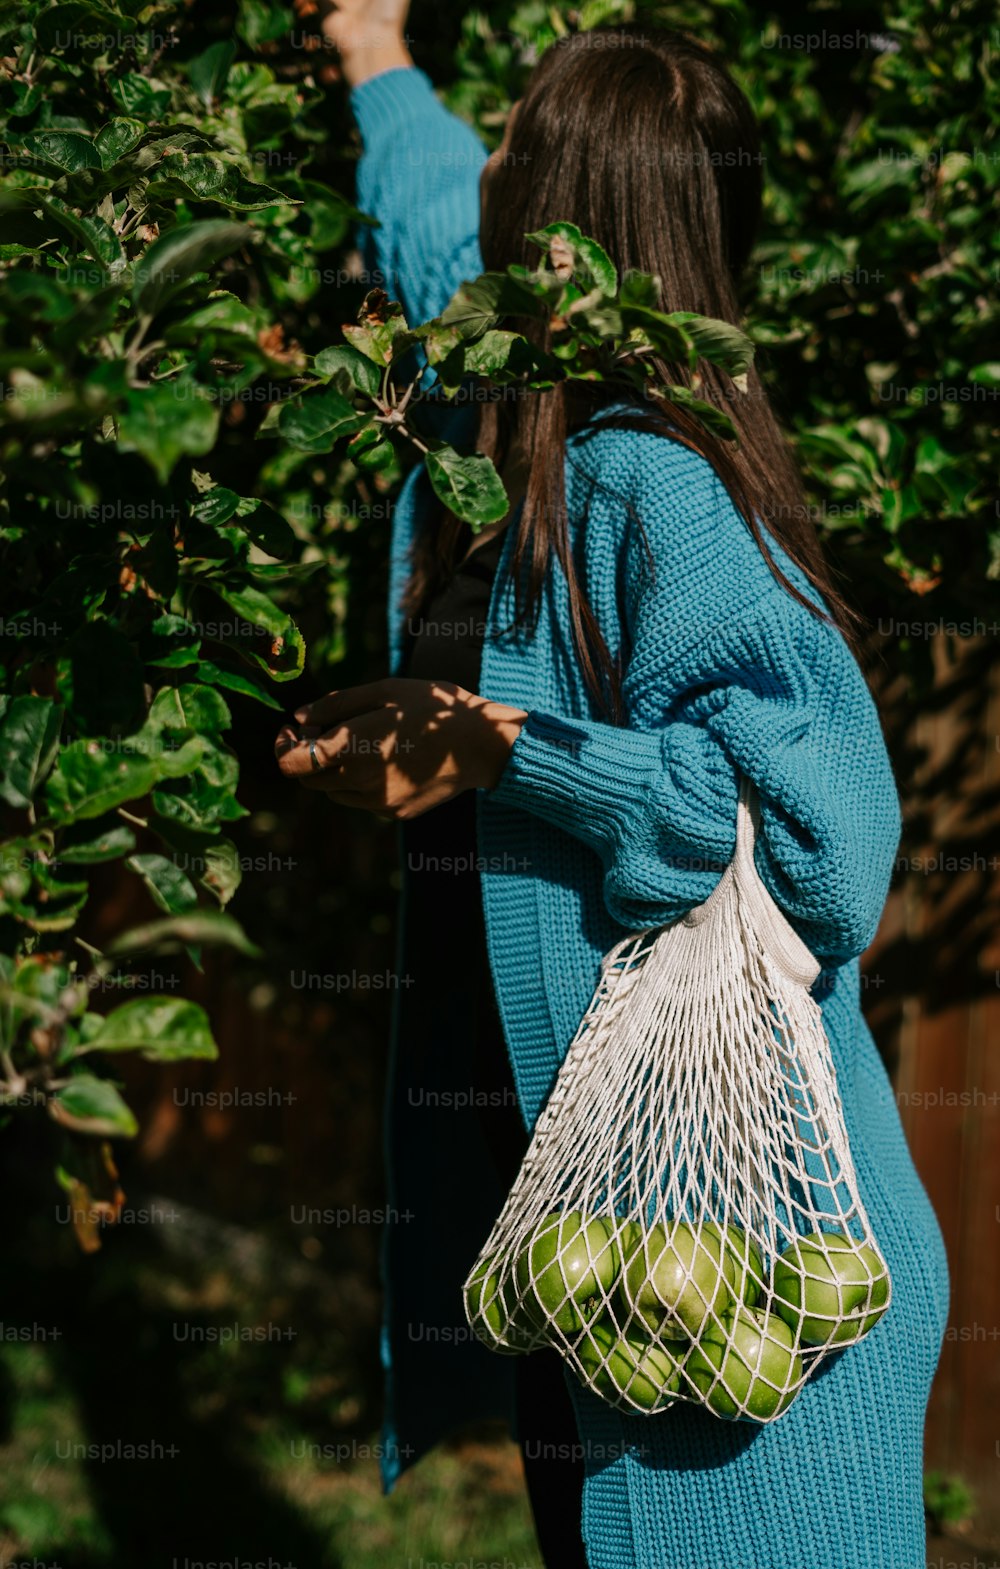 a woman in a blue sweater carrying a mesh bag